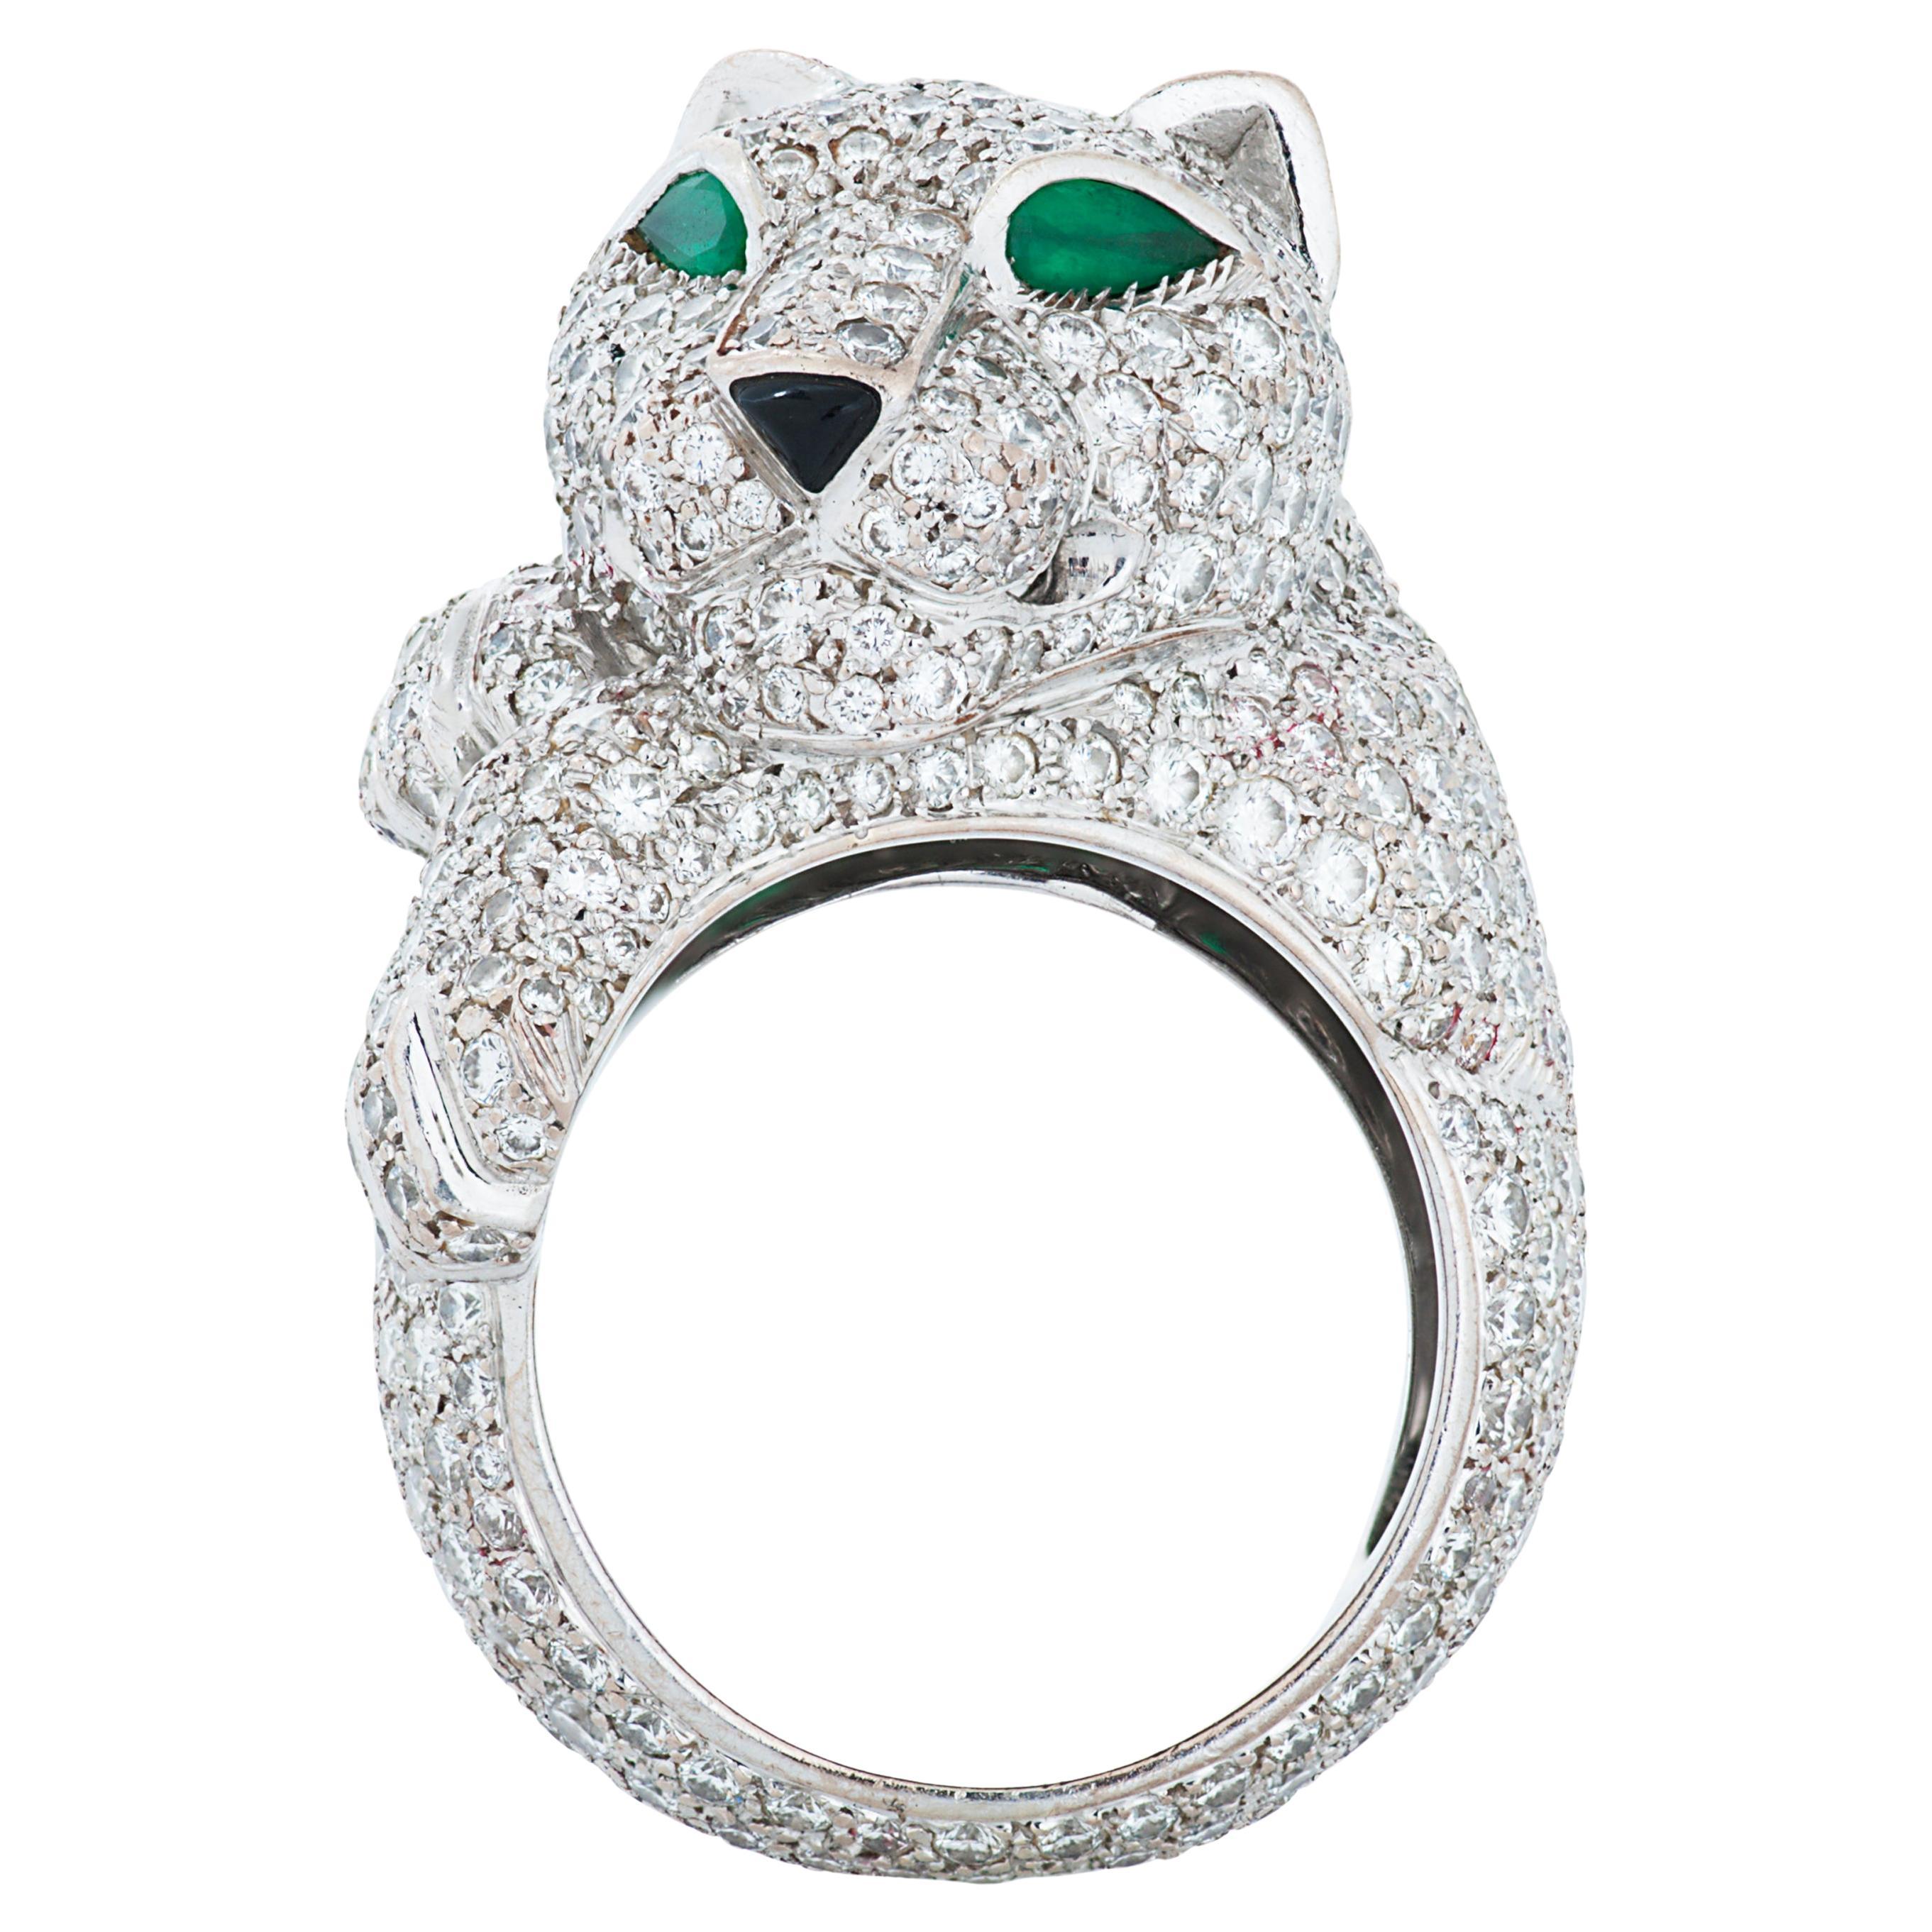 Panthere De Cartier diamond panther head ring in 18k white gold, with emerald eyes and an onyx nose.

This Cartier ring features approximately 6.00 carats of round brilliant cut diamonds pave set over the panther as well as around the shank. 

The